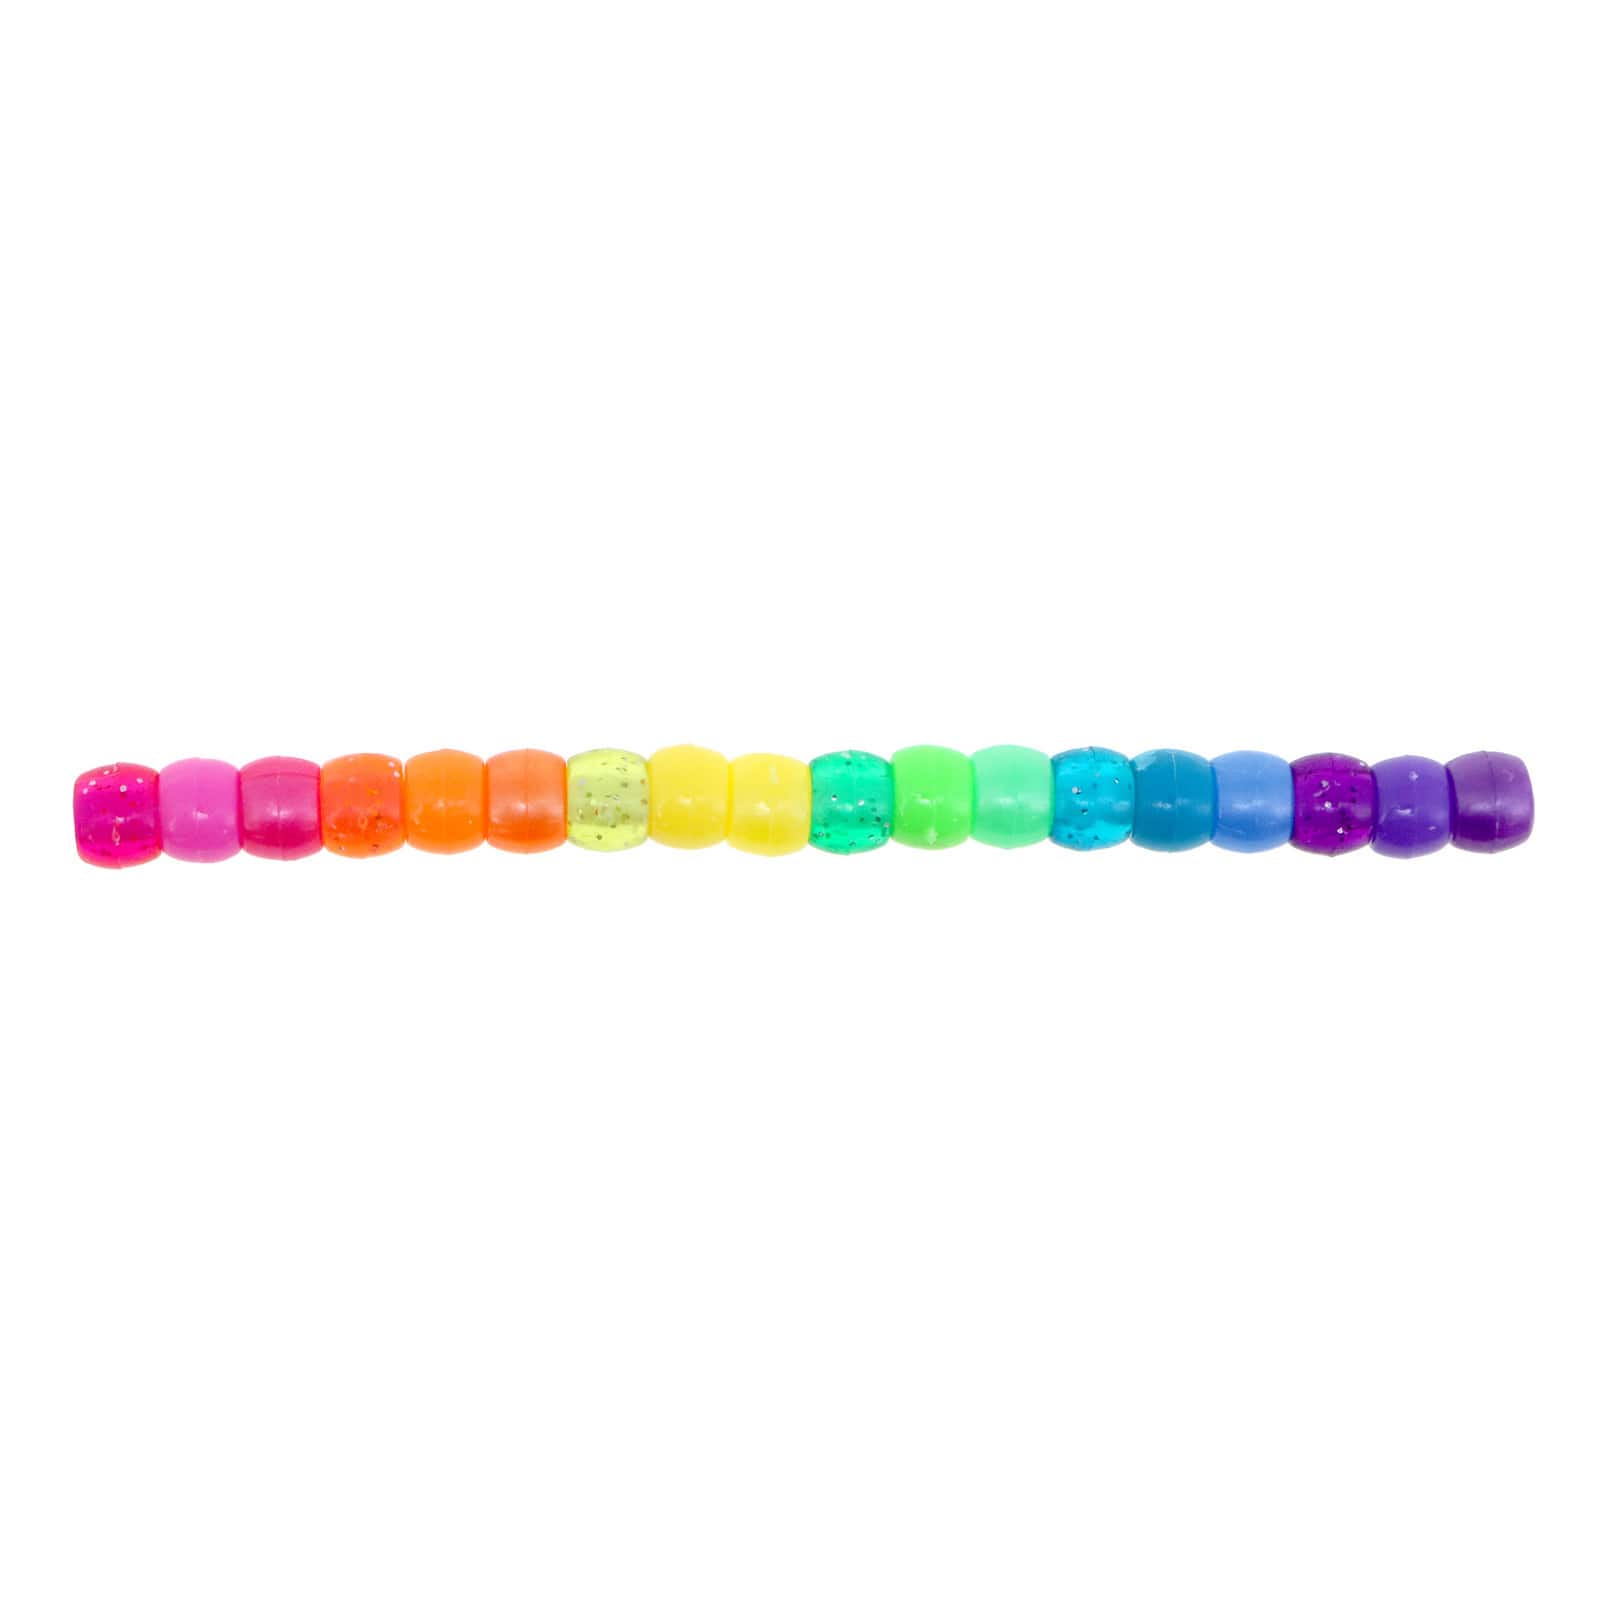 Sulyn Clubhouse Crafts Pony Beads, Assorted Colors, Set of 2300 